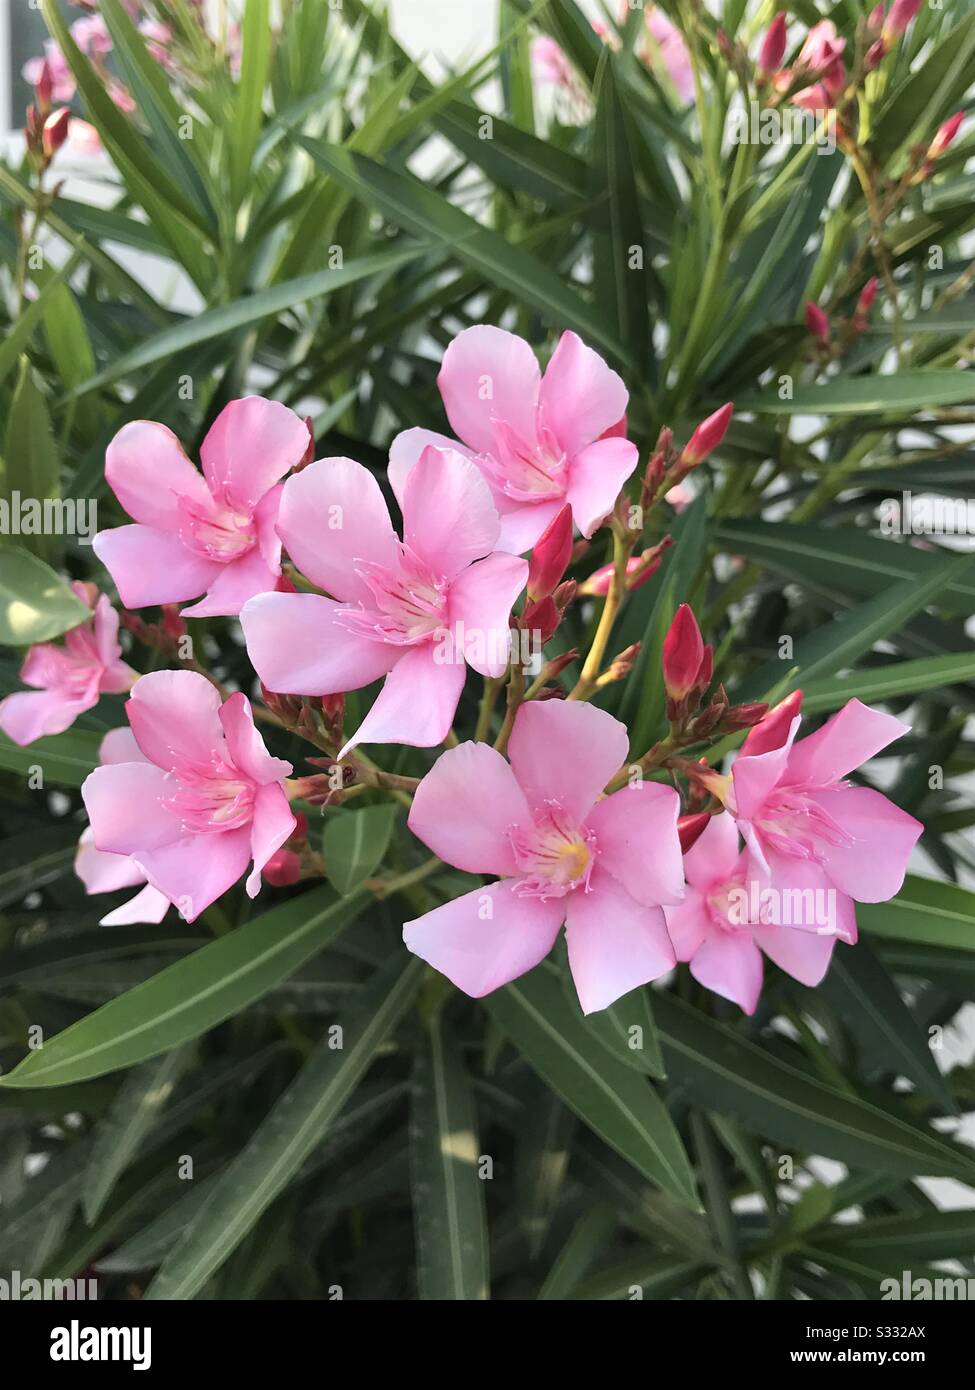 Bunch of Nerium Oleander aka Pink Arali flower in my neighbourhood garden in India, this flower they used for prayer offering , has nice pleasant smell, leaves sap is poisonous Stock Photo